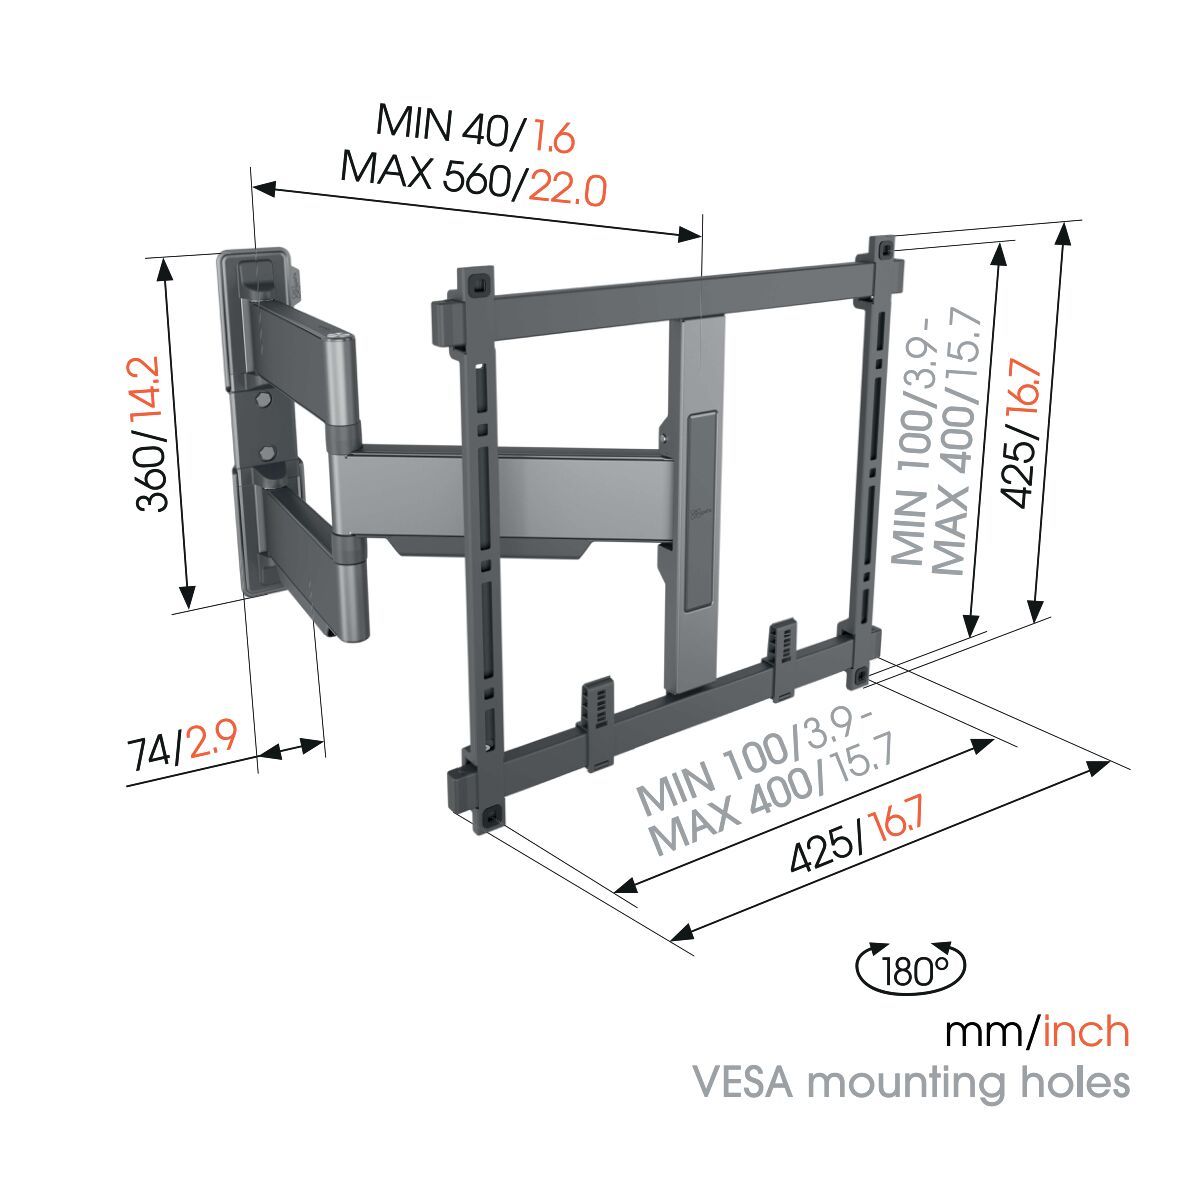 Vogel's TVM 5445 Full-Motion TV Wall Mount (black) - Suitable for 32 up to 65 inch TVs - Full motion (up to 180°) swivel - Dimensions